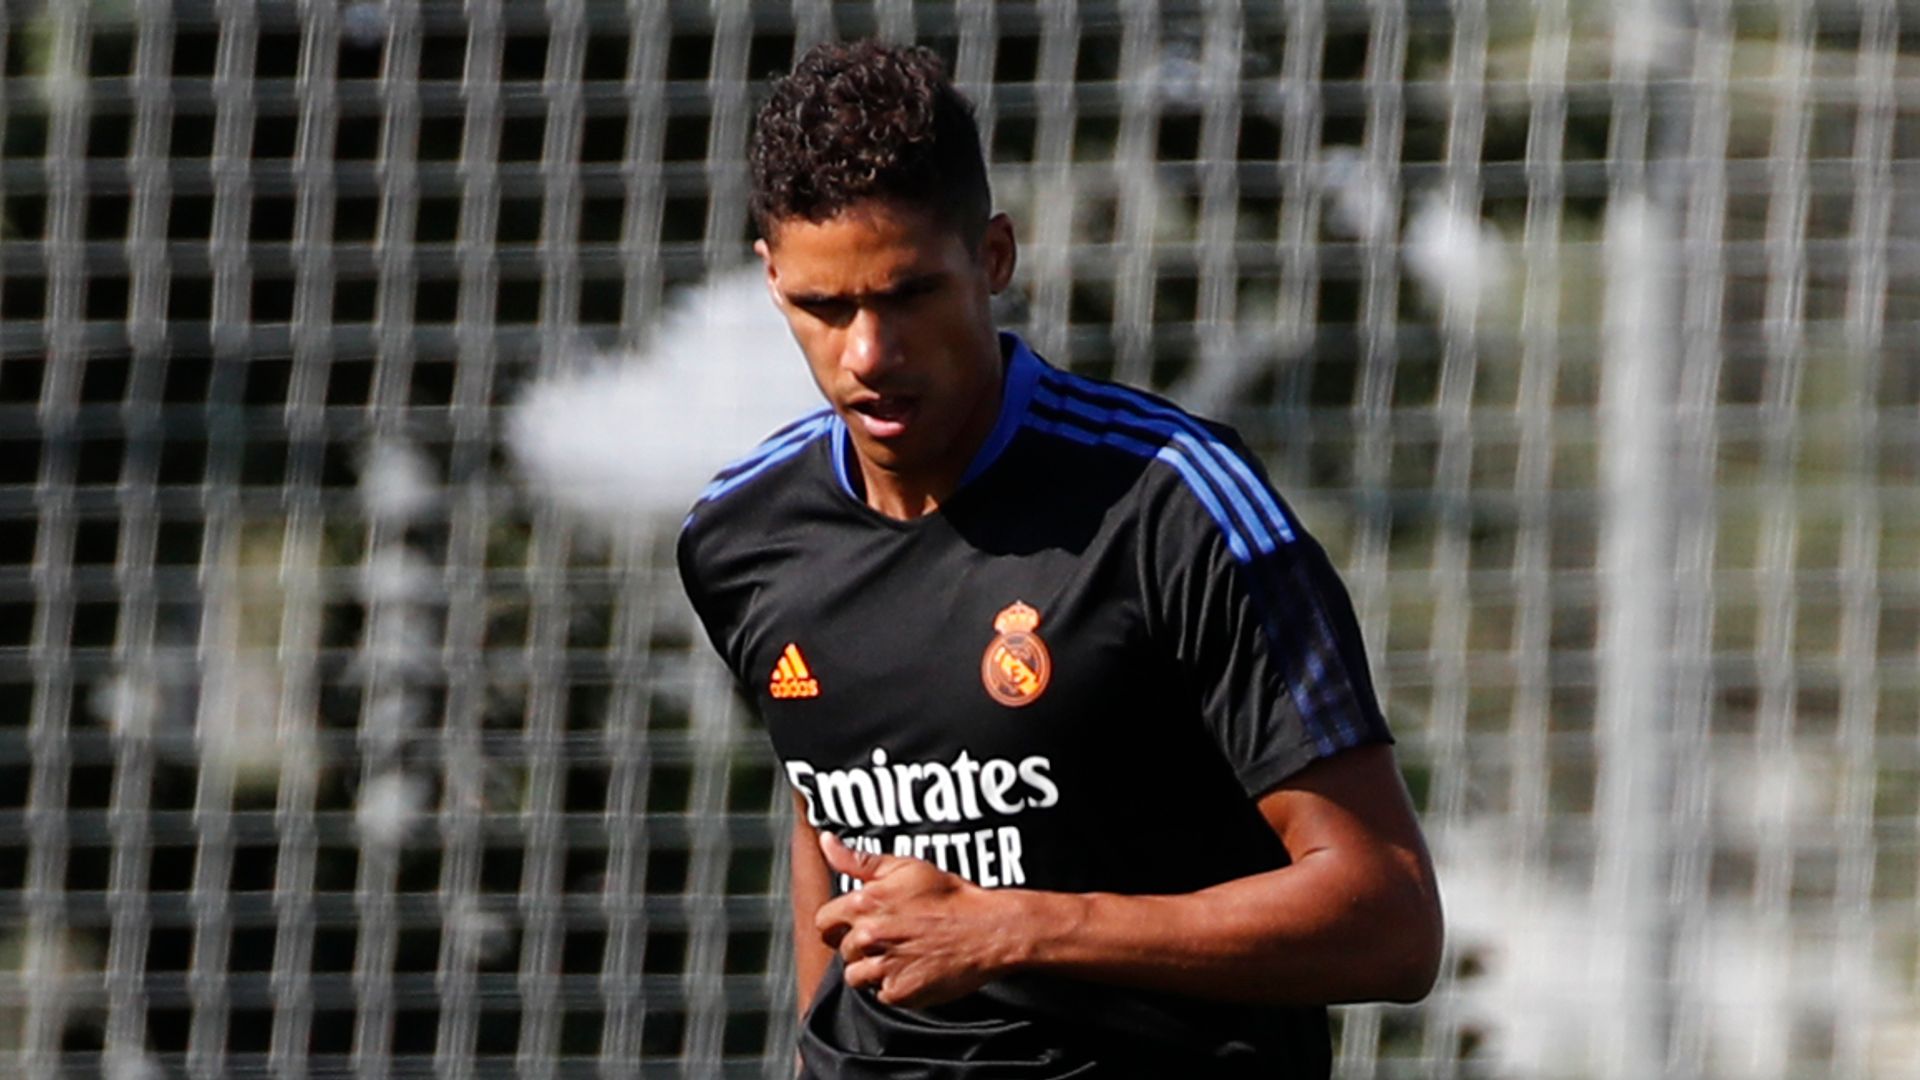 Man Utd confirm deal with Real Madrid for Varane